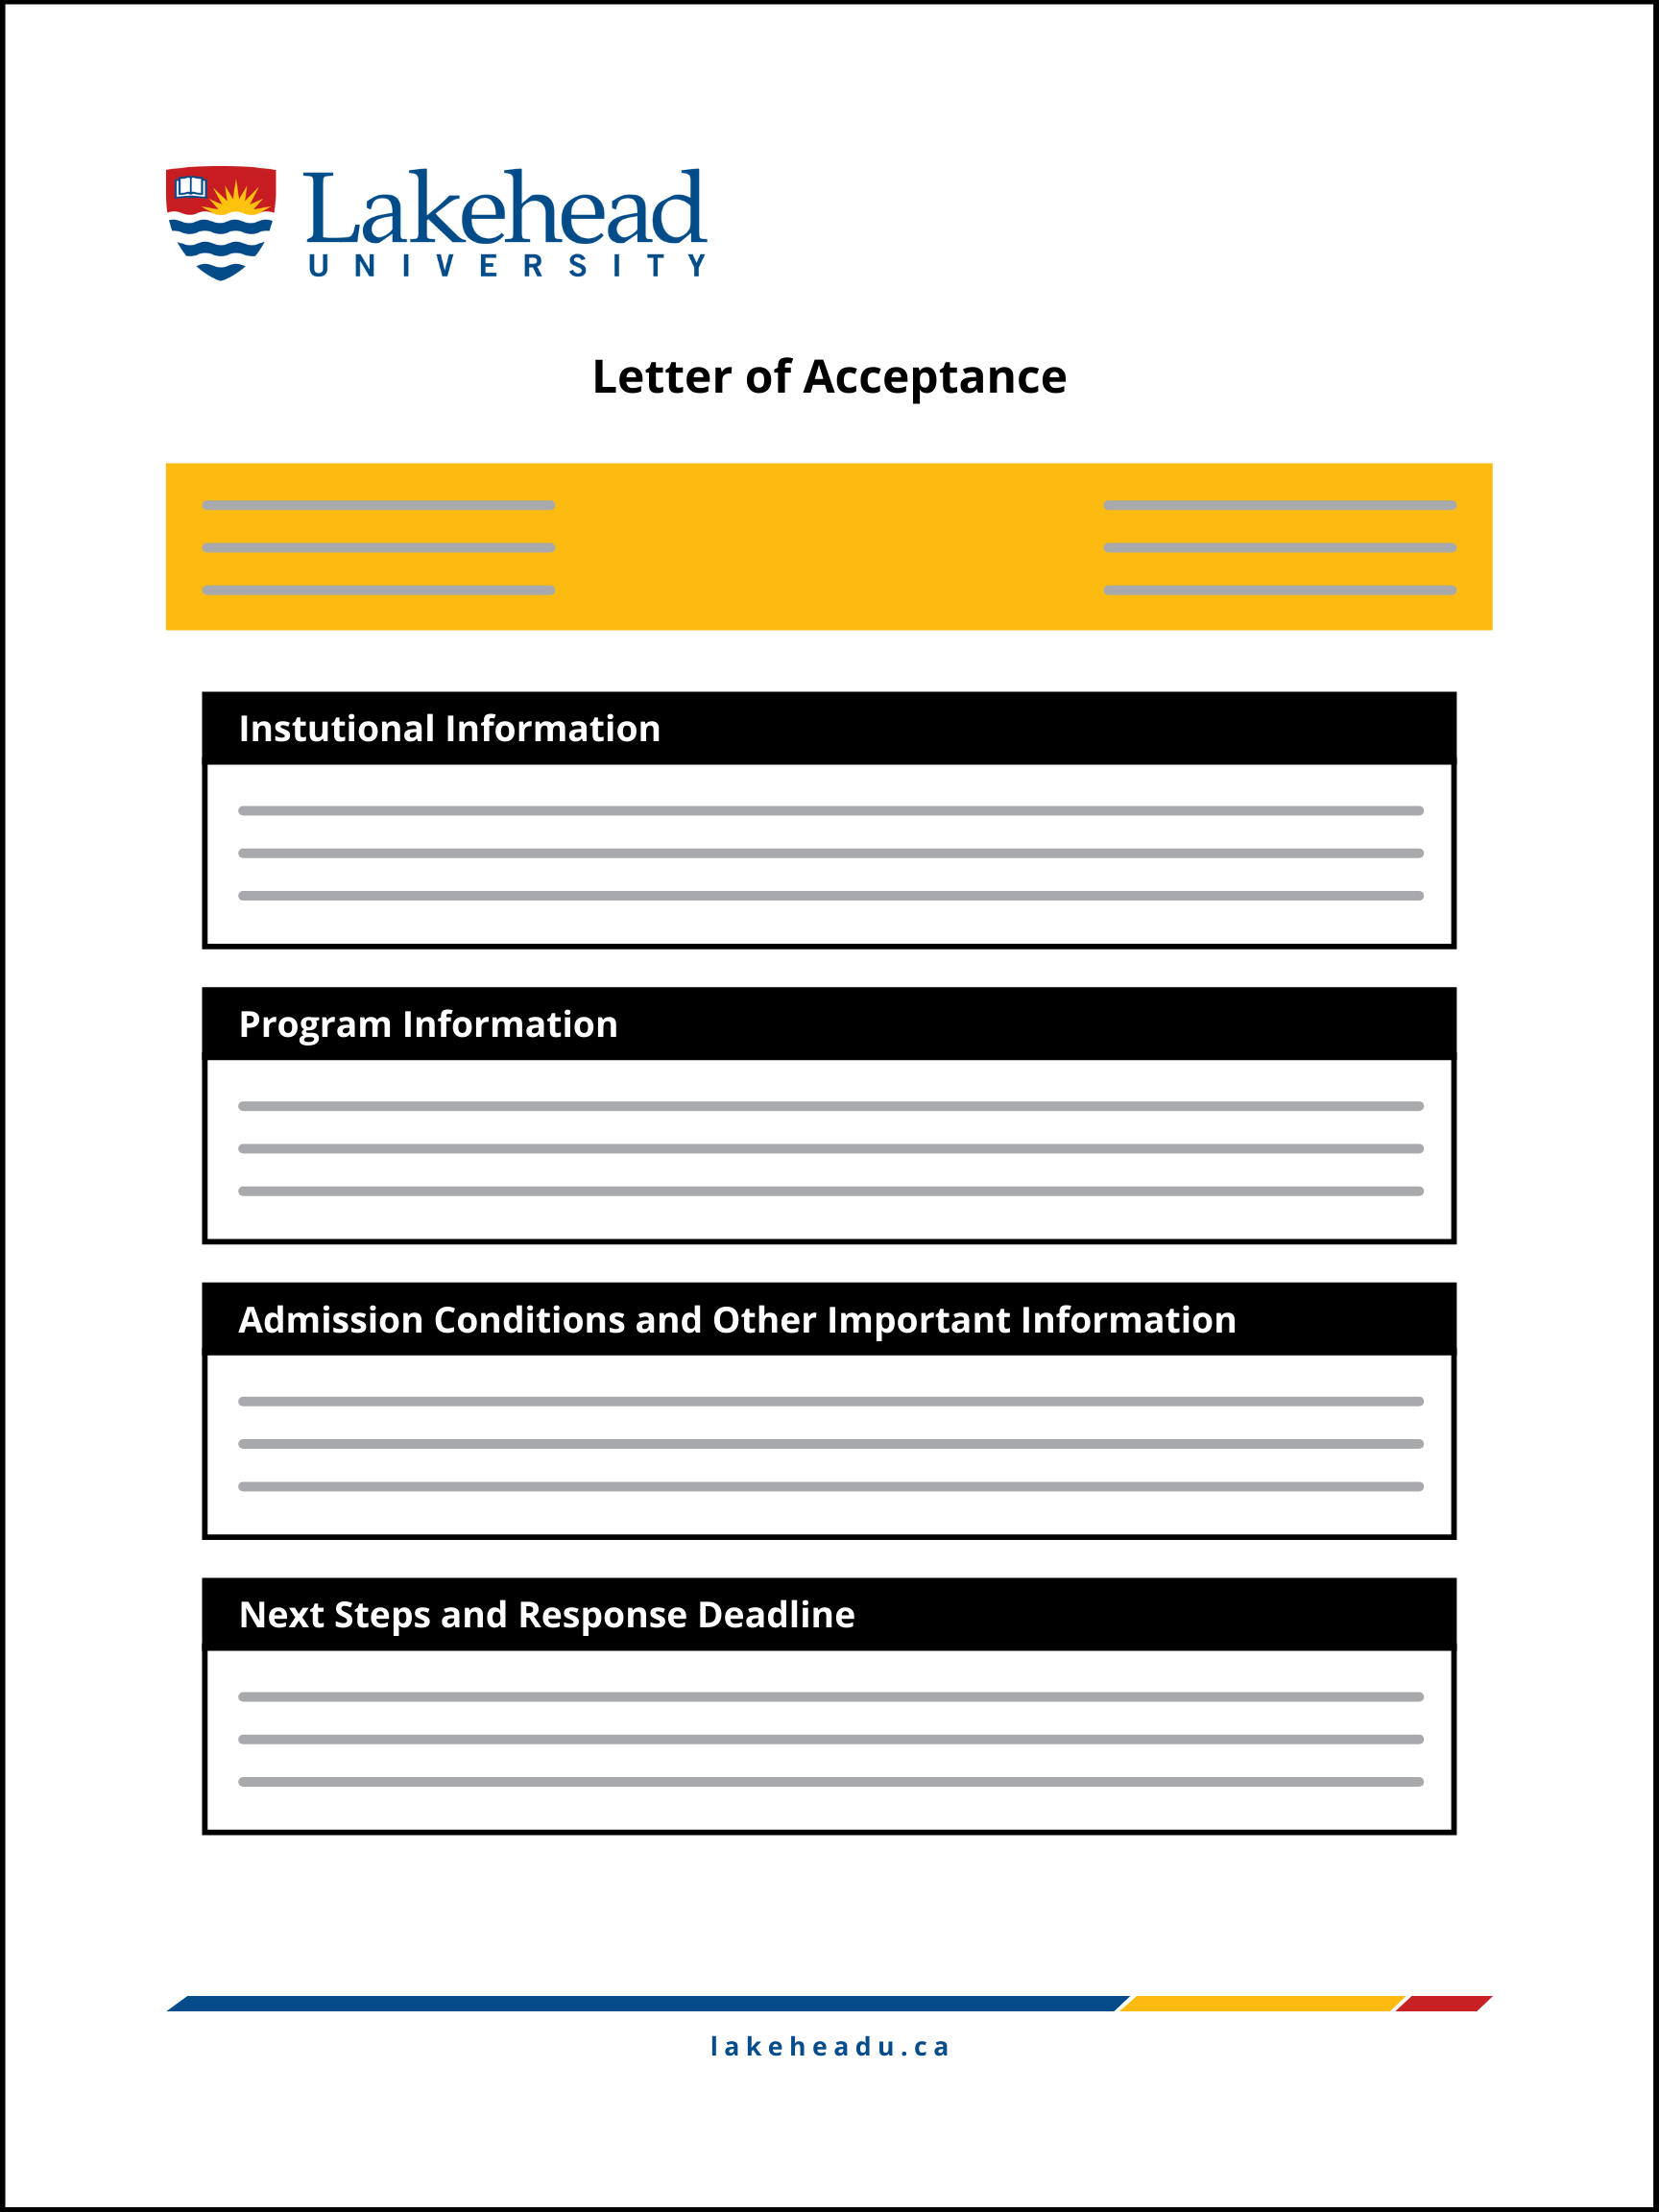 Letter of Acceptance - personal info area